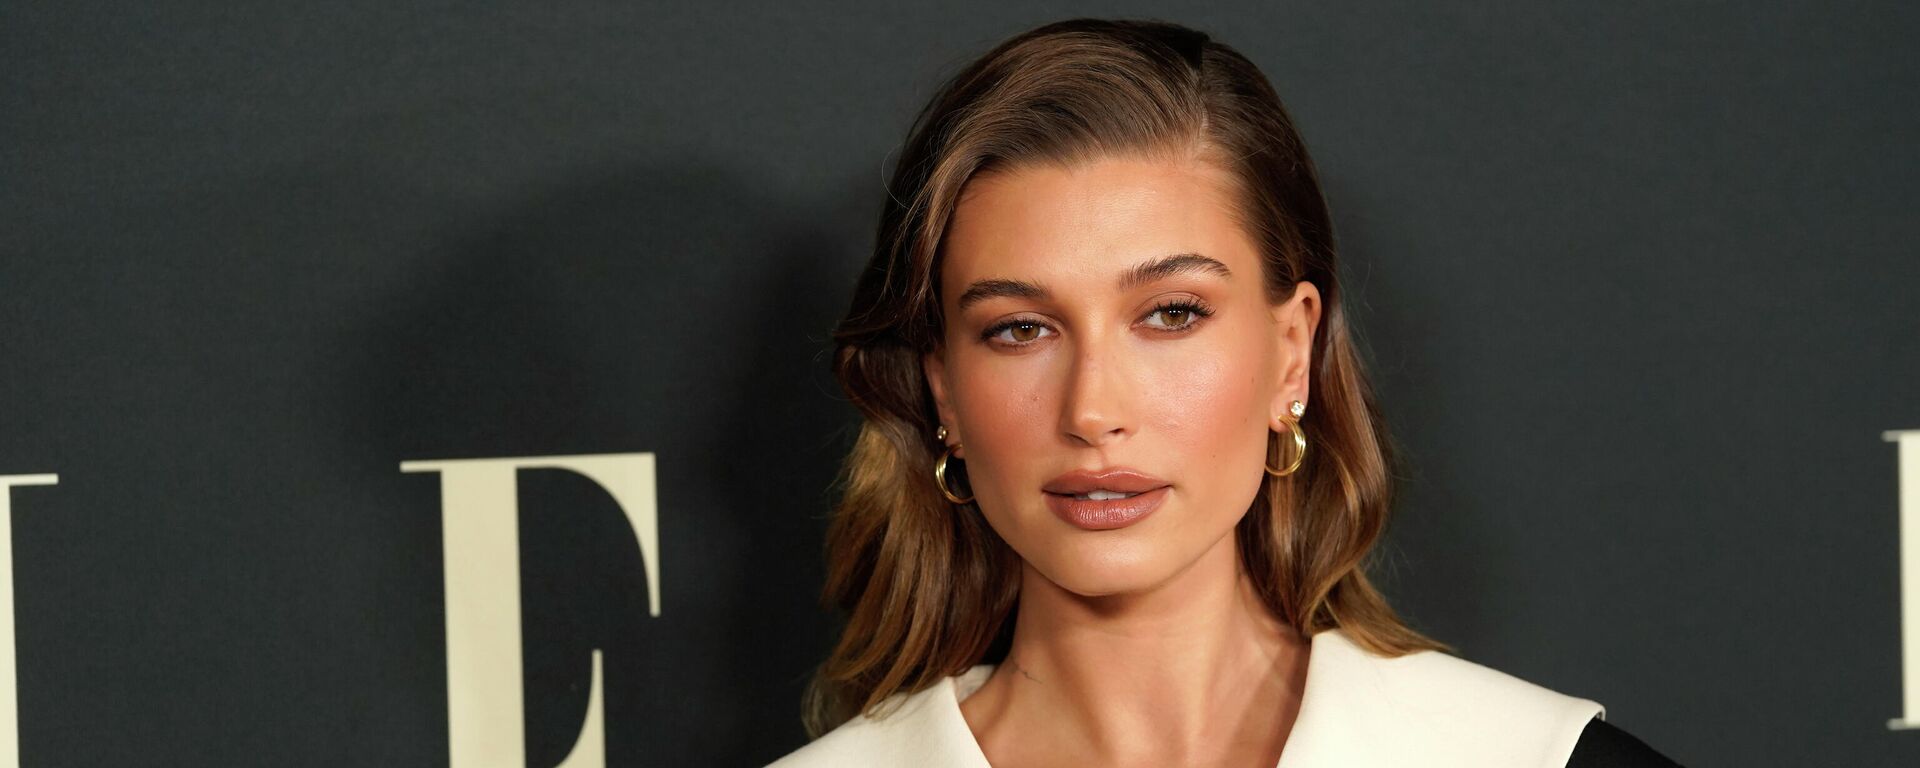 FILE - Hailey Bieber arrives at the 27th annual ELLE Women in Hollywood celebration on Tuesday, Oct. 19, 2021, at the Academy Museum of Motion Pictures in Los Angeles. The model says on Saturday, March 12, 2022, that she's fine after a health scare, suffering a small blood clot to her brain. Bieber, wife of pop star Justin Bieber, posted on Instagram Saturday that she was having breakfast with her husband on Thursday when she began feeling stroke-like symptoms. - Sputnik International, 1920, 13.03.2022